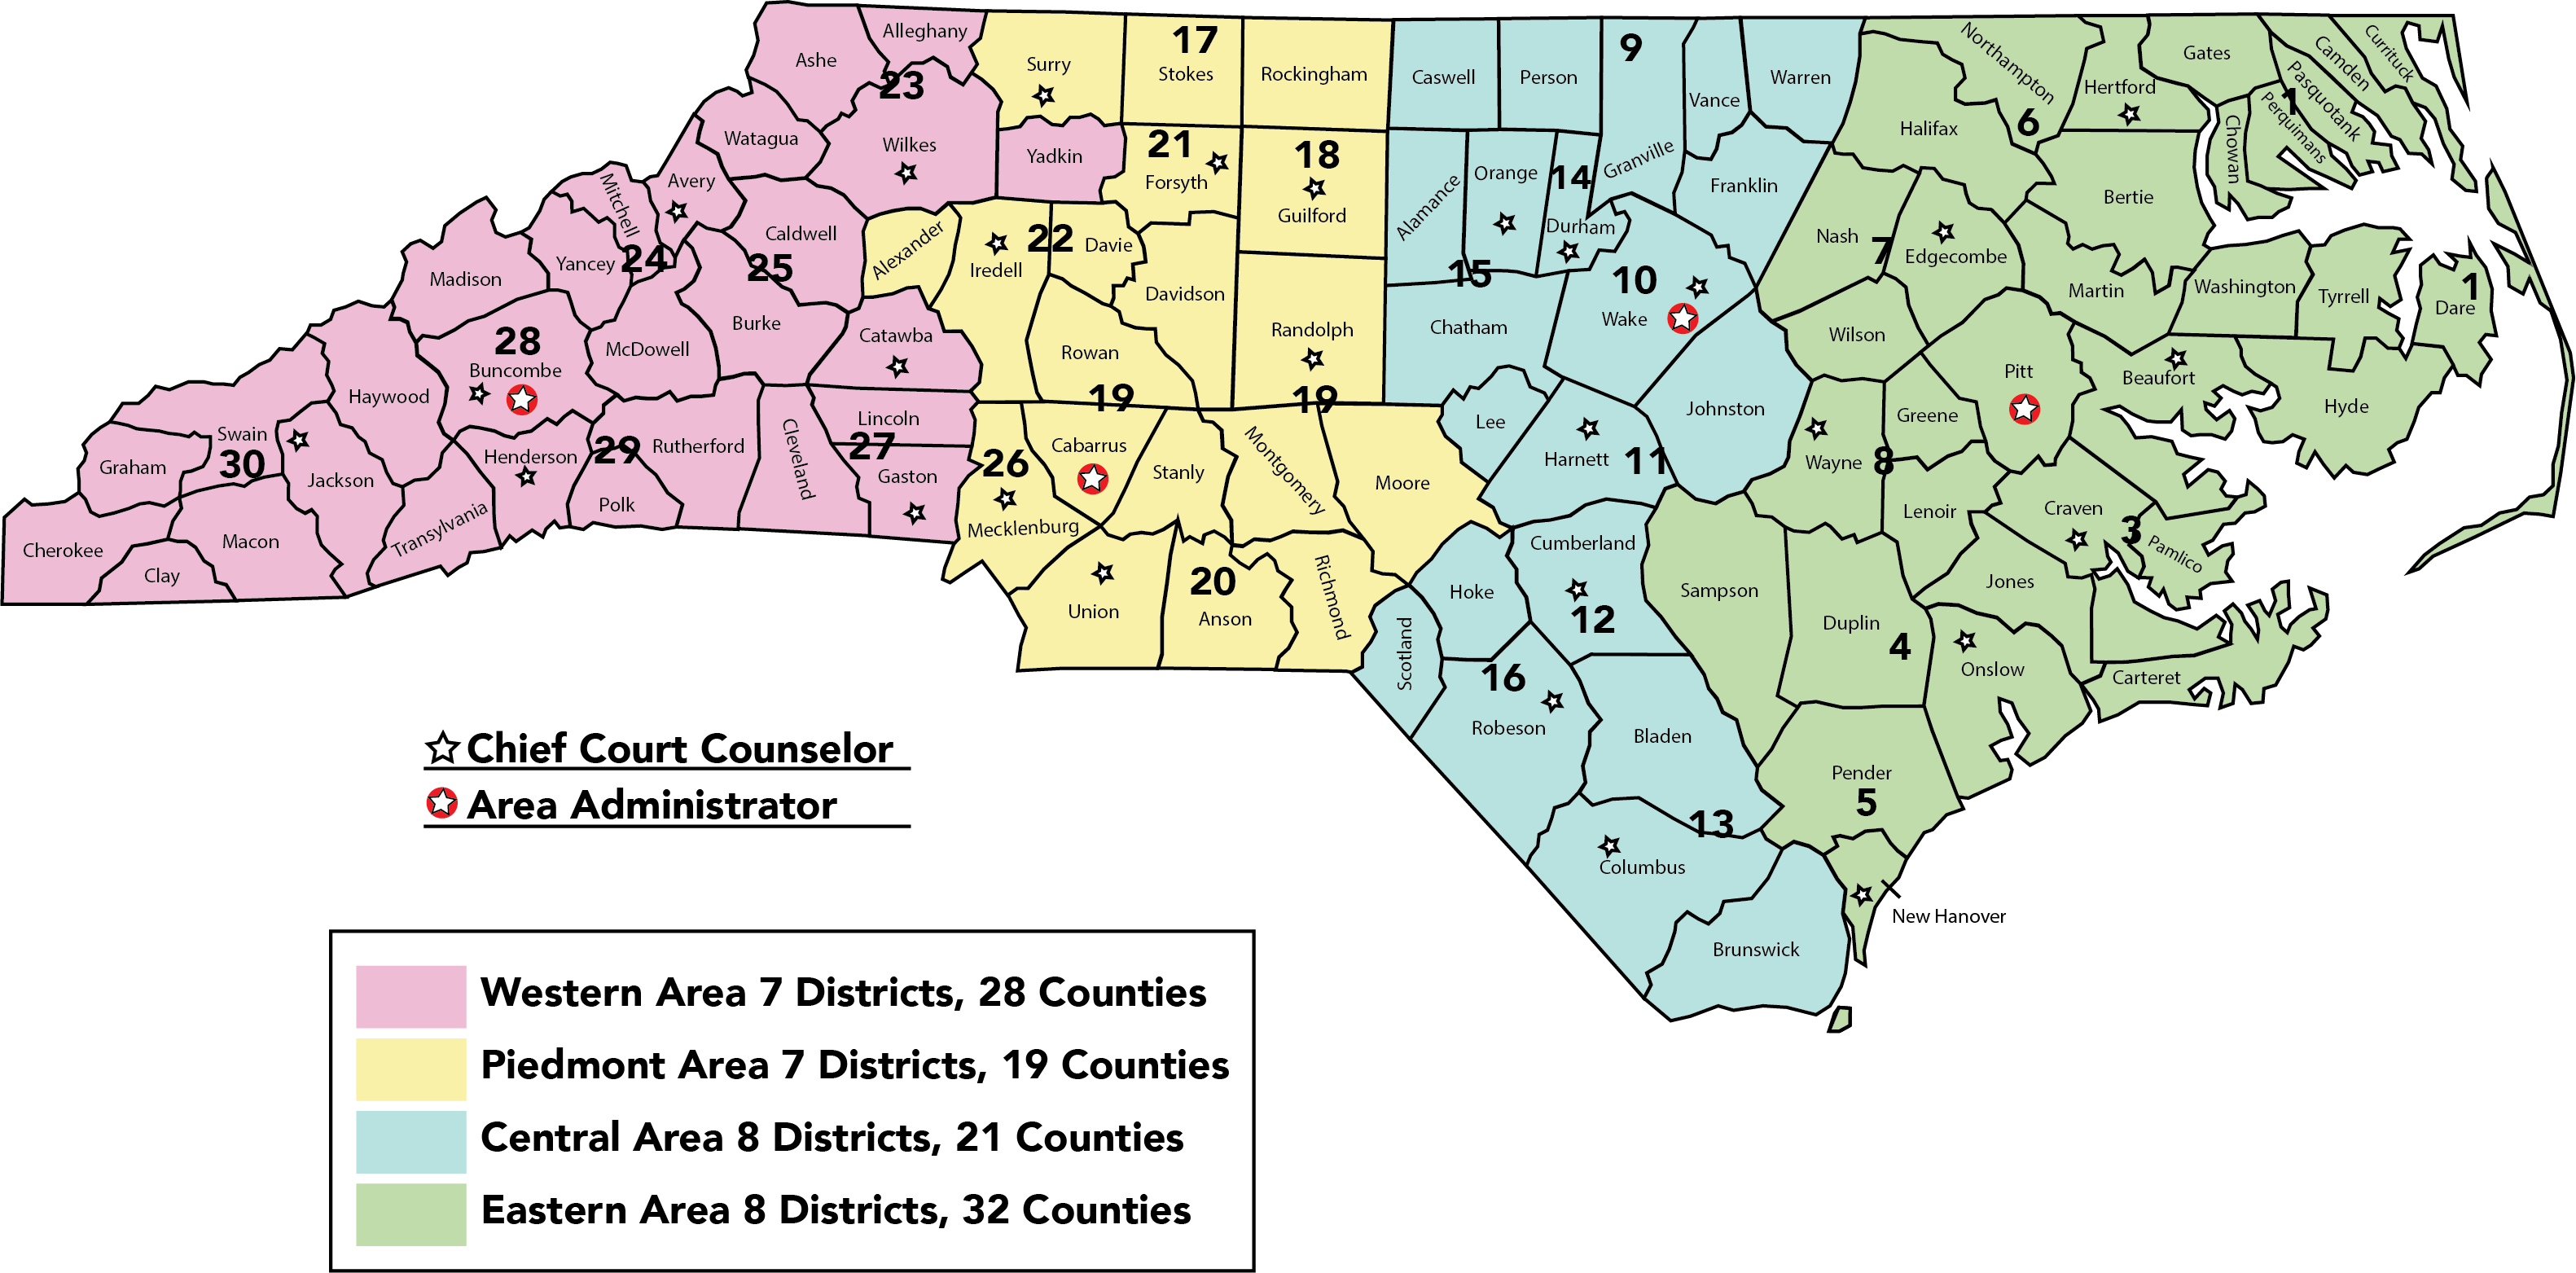 North Carolina Map divided in 4 sections